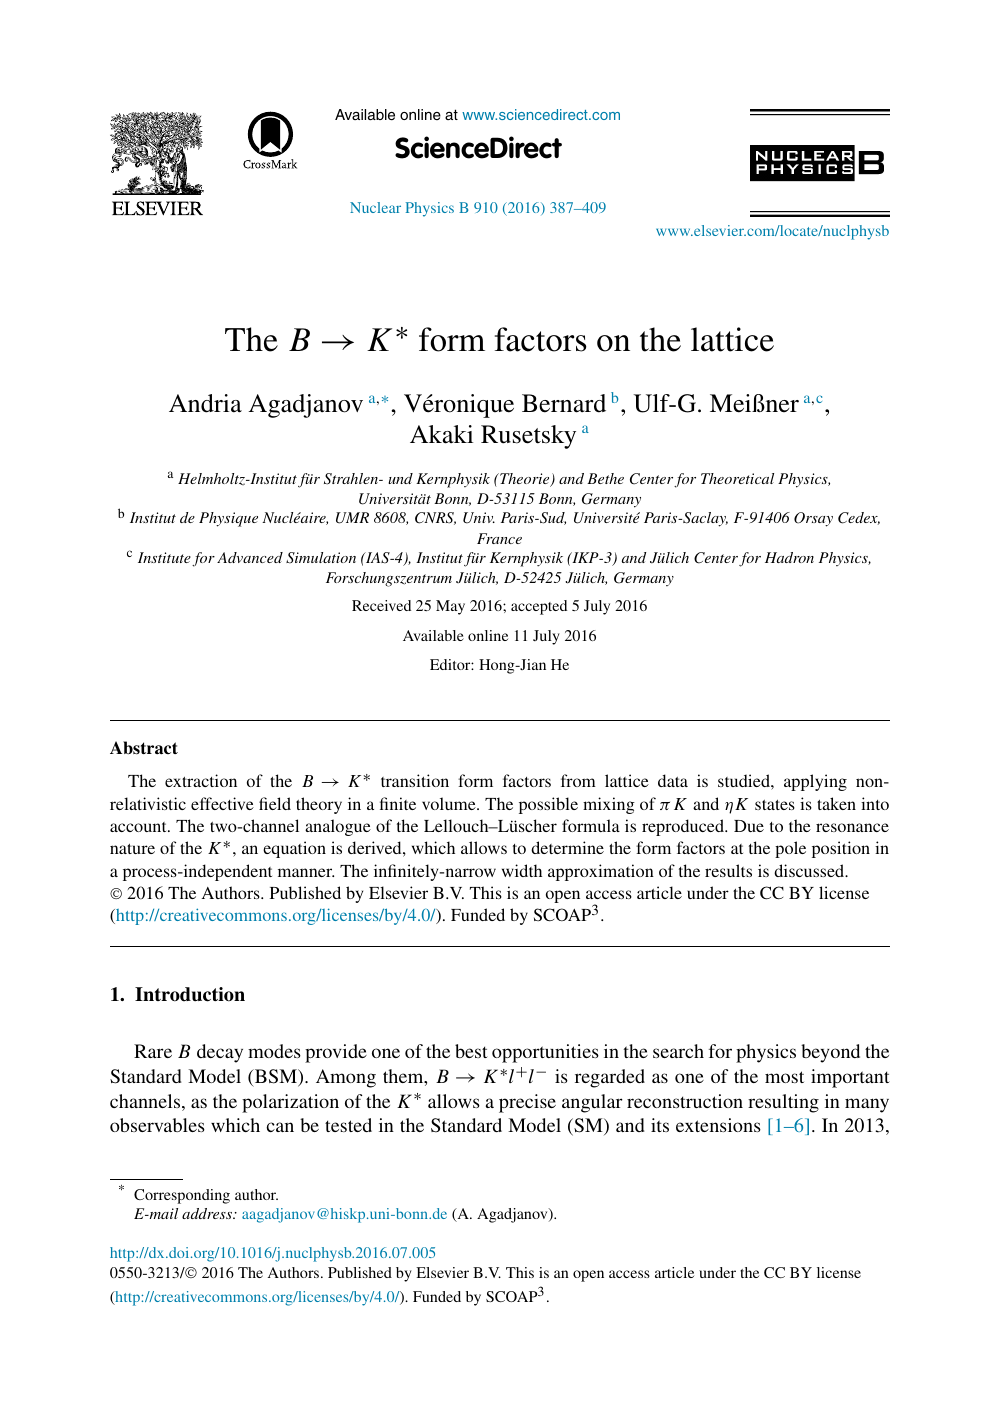 The B K Form Factors On The Lattice Topic Of Research Paper In Physical Sciences Download Scholarly Article Pdf And Read For Free On Cyberleninka Open Science Hub